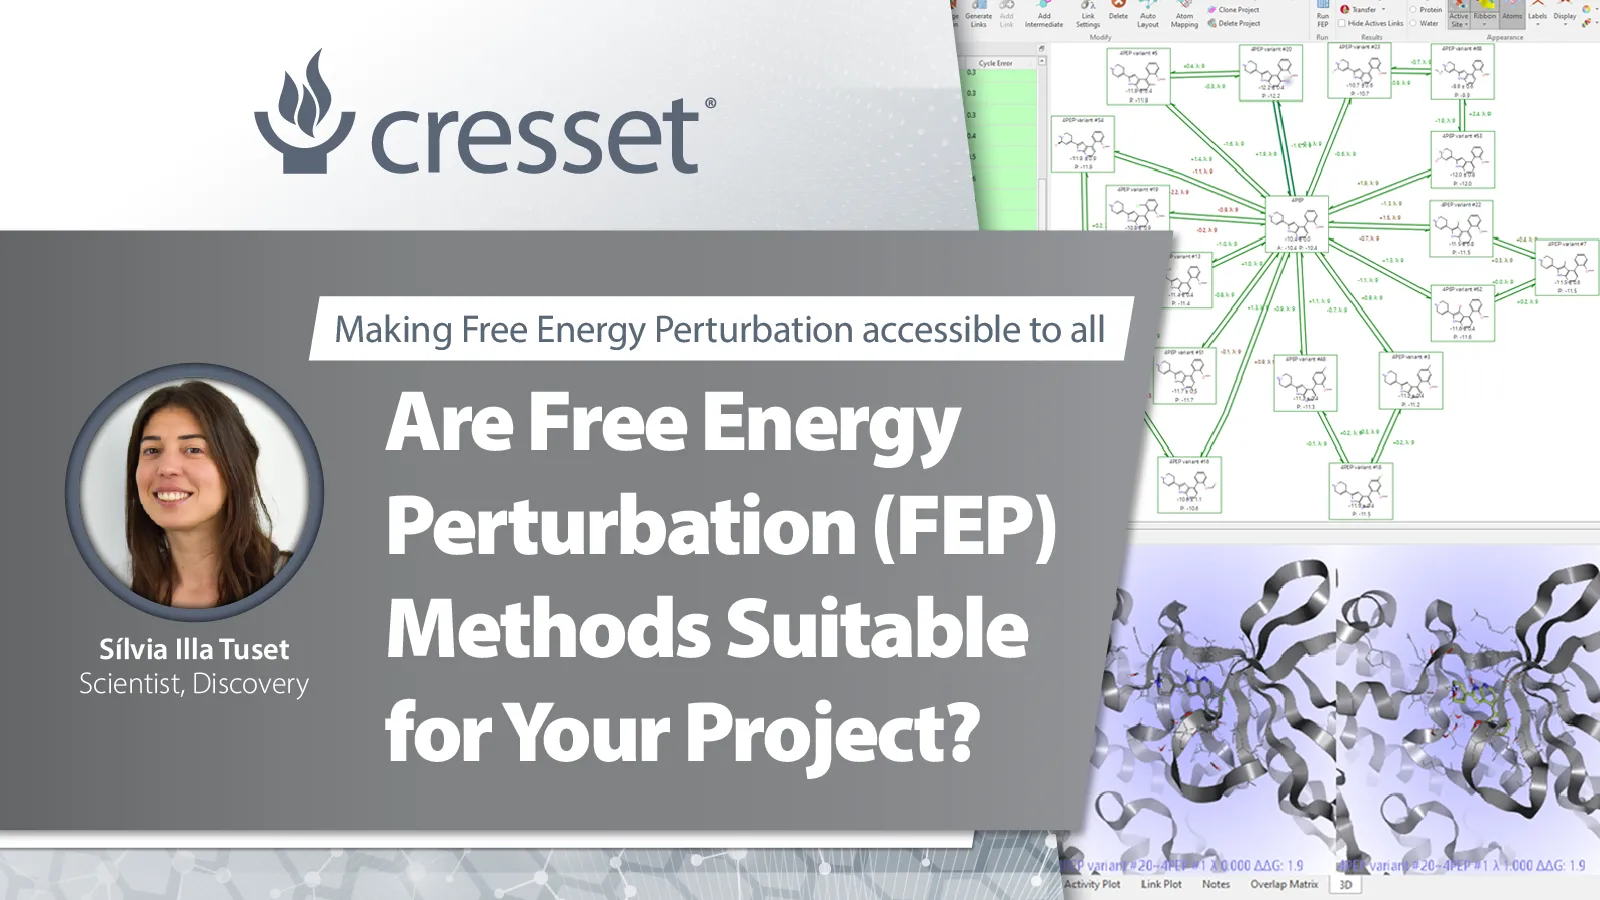 Are Free Energy Perturbation (FEP) Methods Suitable for Your Project?